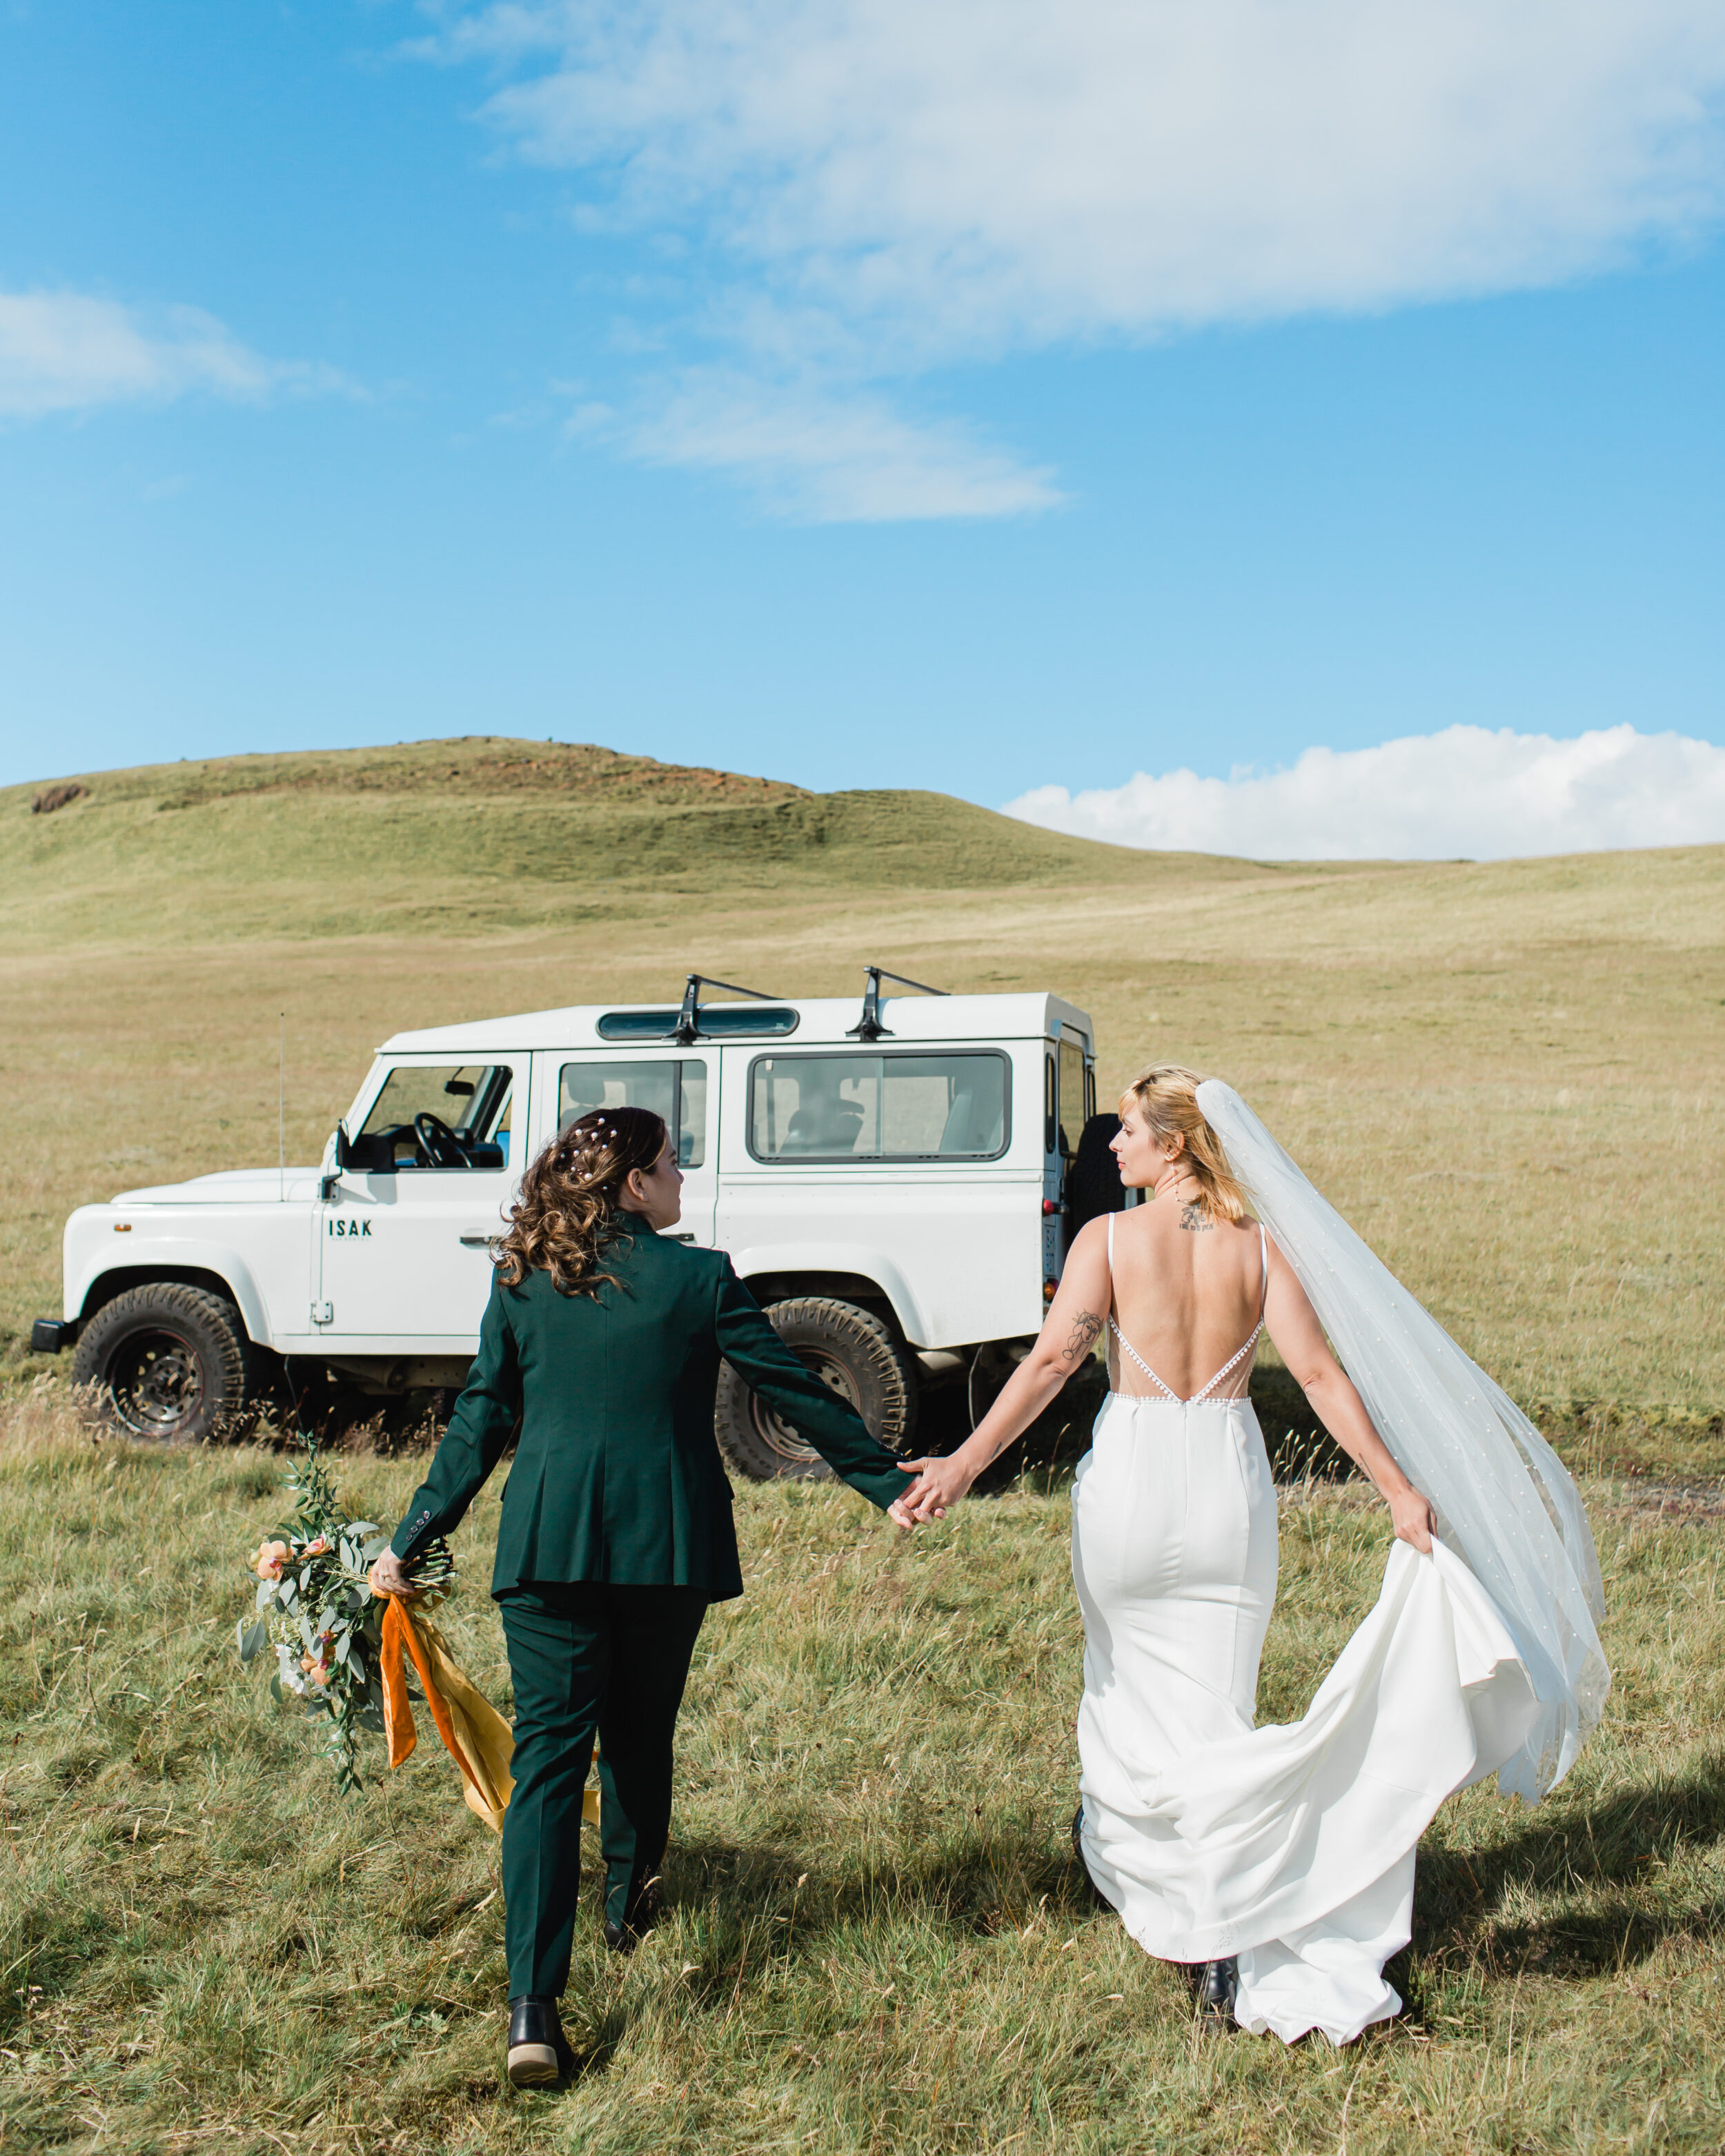 A newlywed couple walks towards their 4x4 vehicle to go off-roading in Iceland.